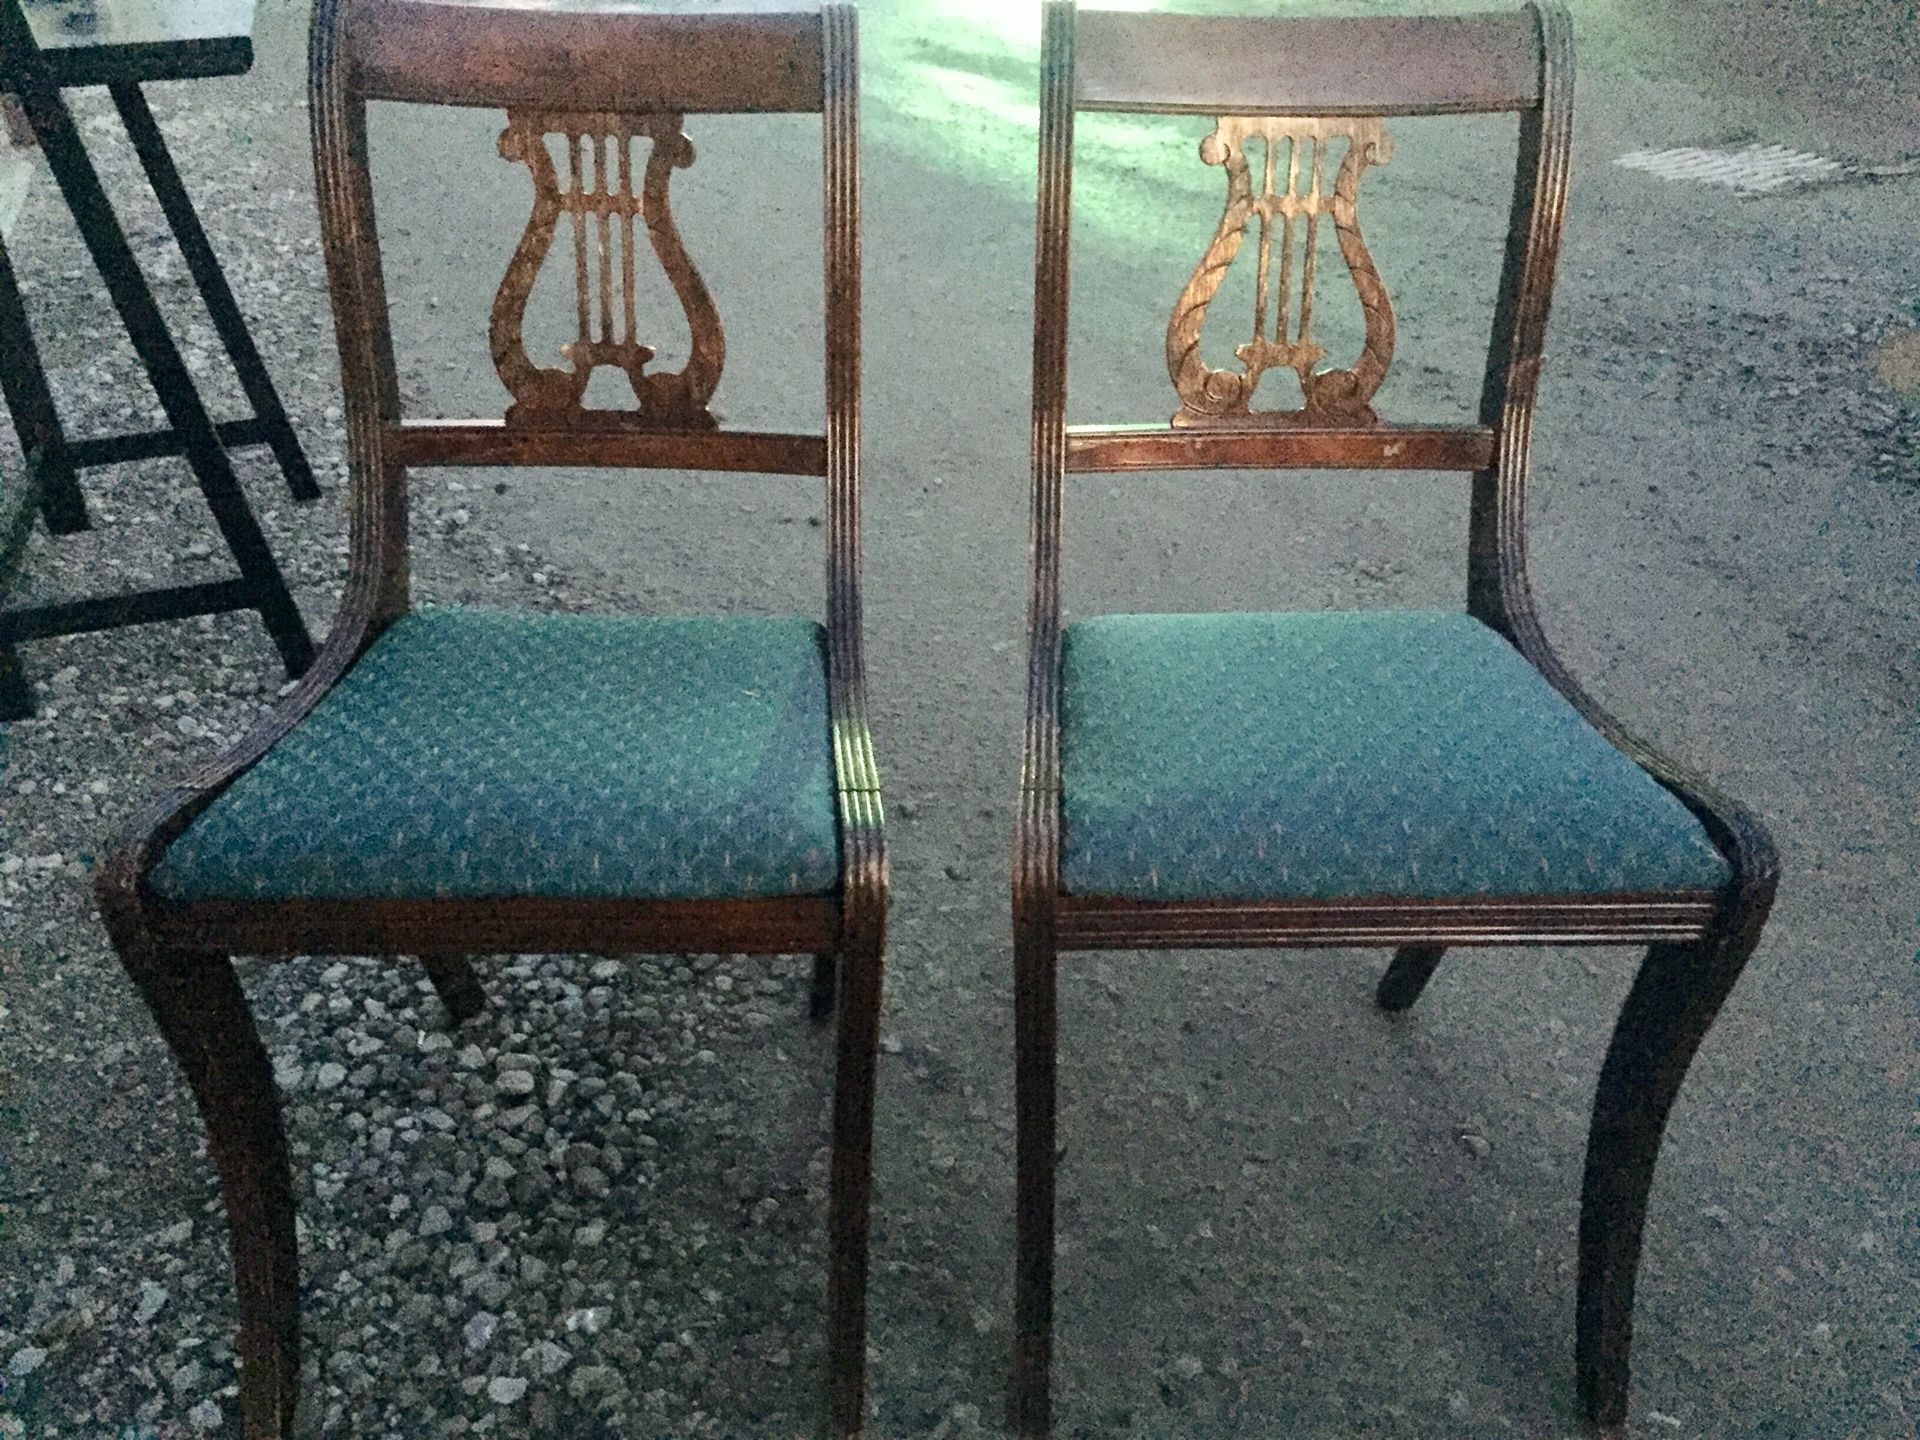 Antique Duncan Phyfe Chairs